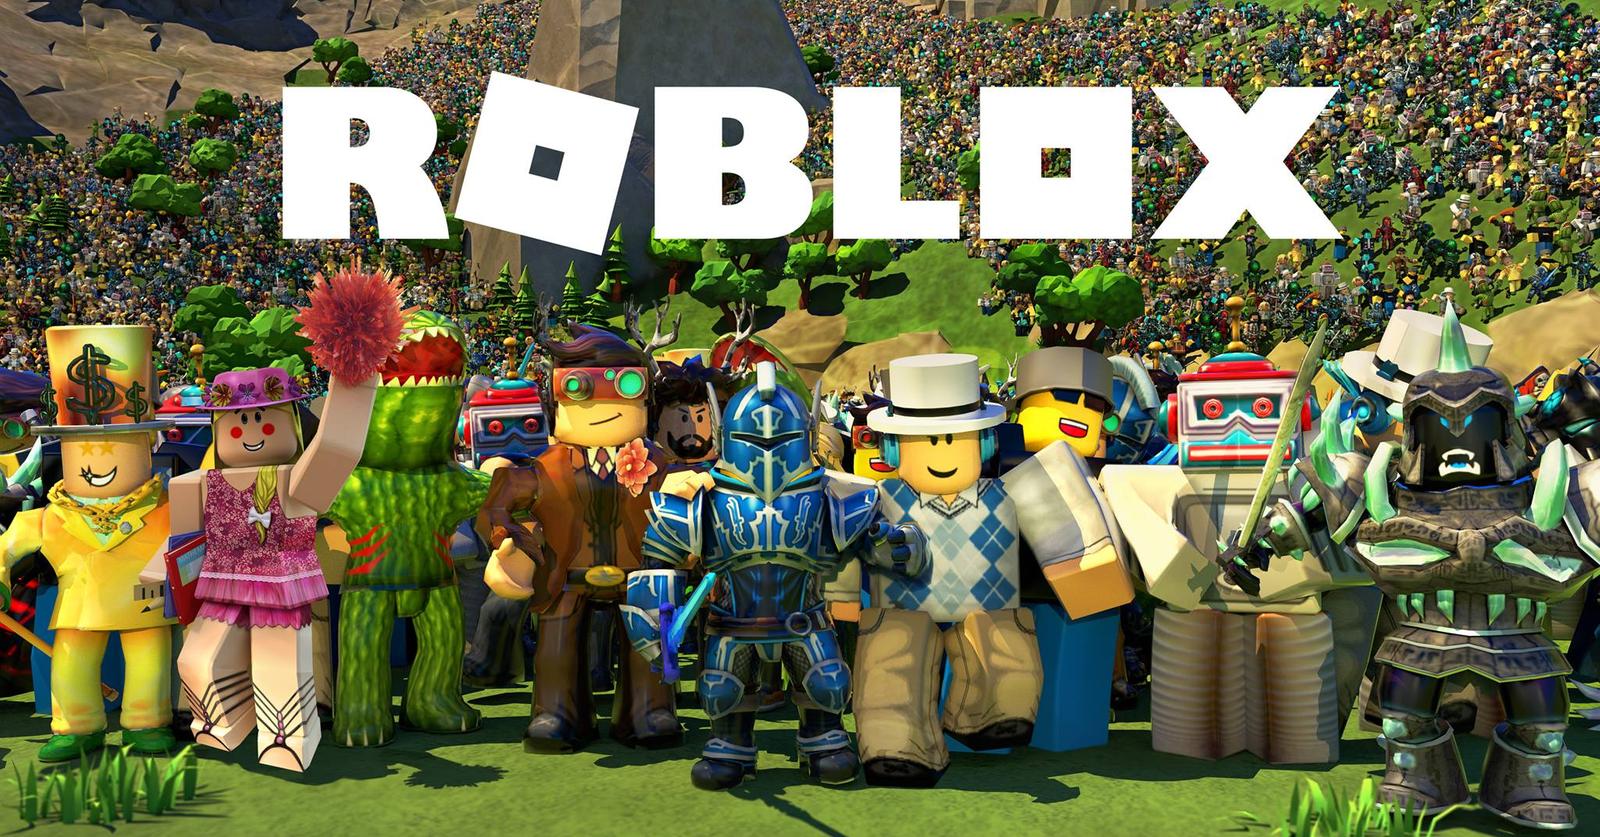 What Is Roblox’s (RBLX) Stock Forecast in 2025?